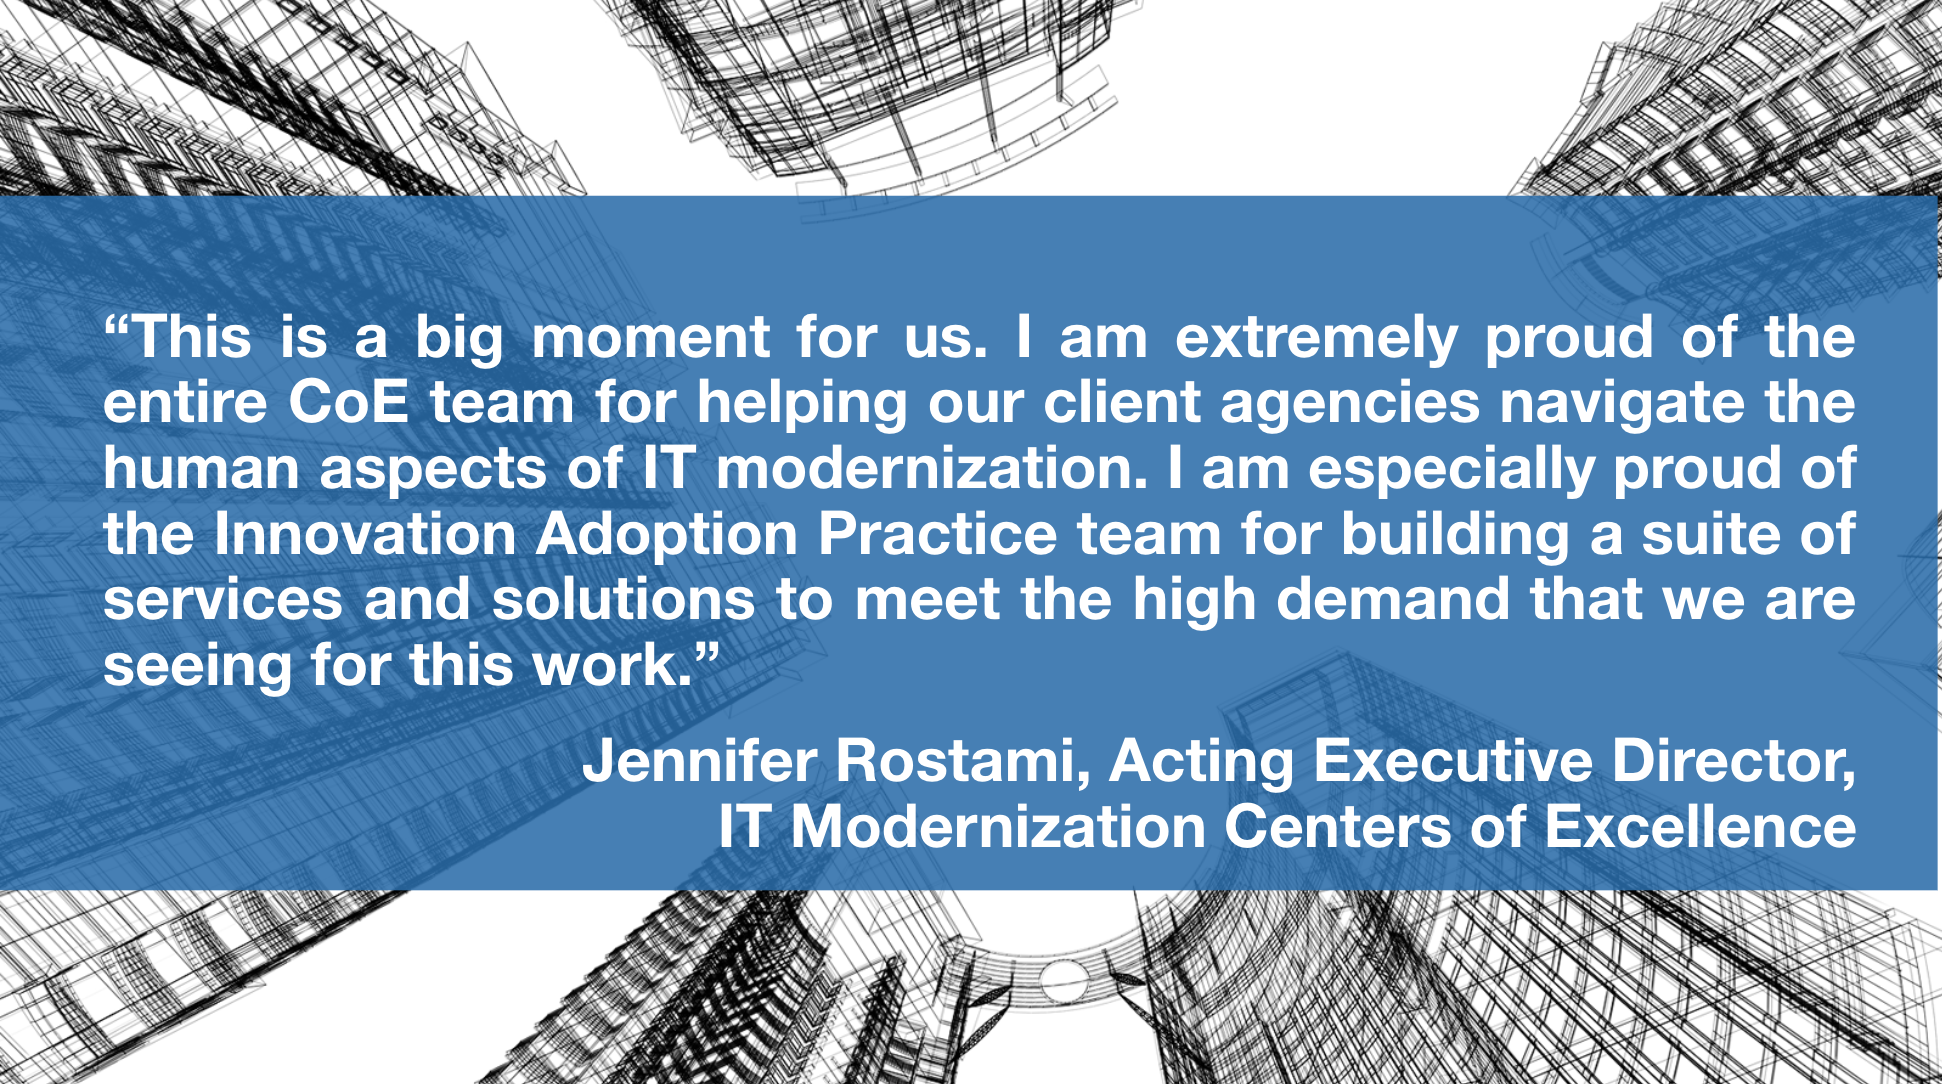 This is a big moment for us. I am extremely proud of the entire CoE team for helping our client agencies navigate the human aspects of IT modernization. I am especially proud of the Innovation Adoption Practice team for building a suite of services and solutions to meet the high demand that we are seeing for this work. -Jennifer Rostami, Acting Executive Director, IT Modernization Centers of Excellence